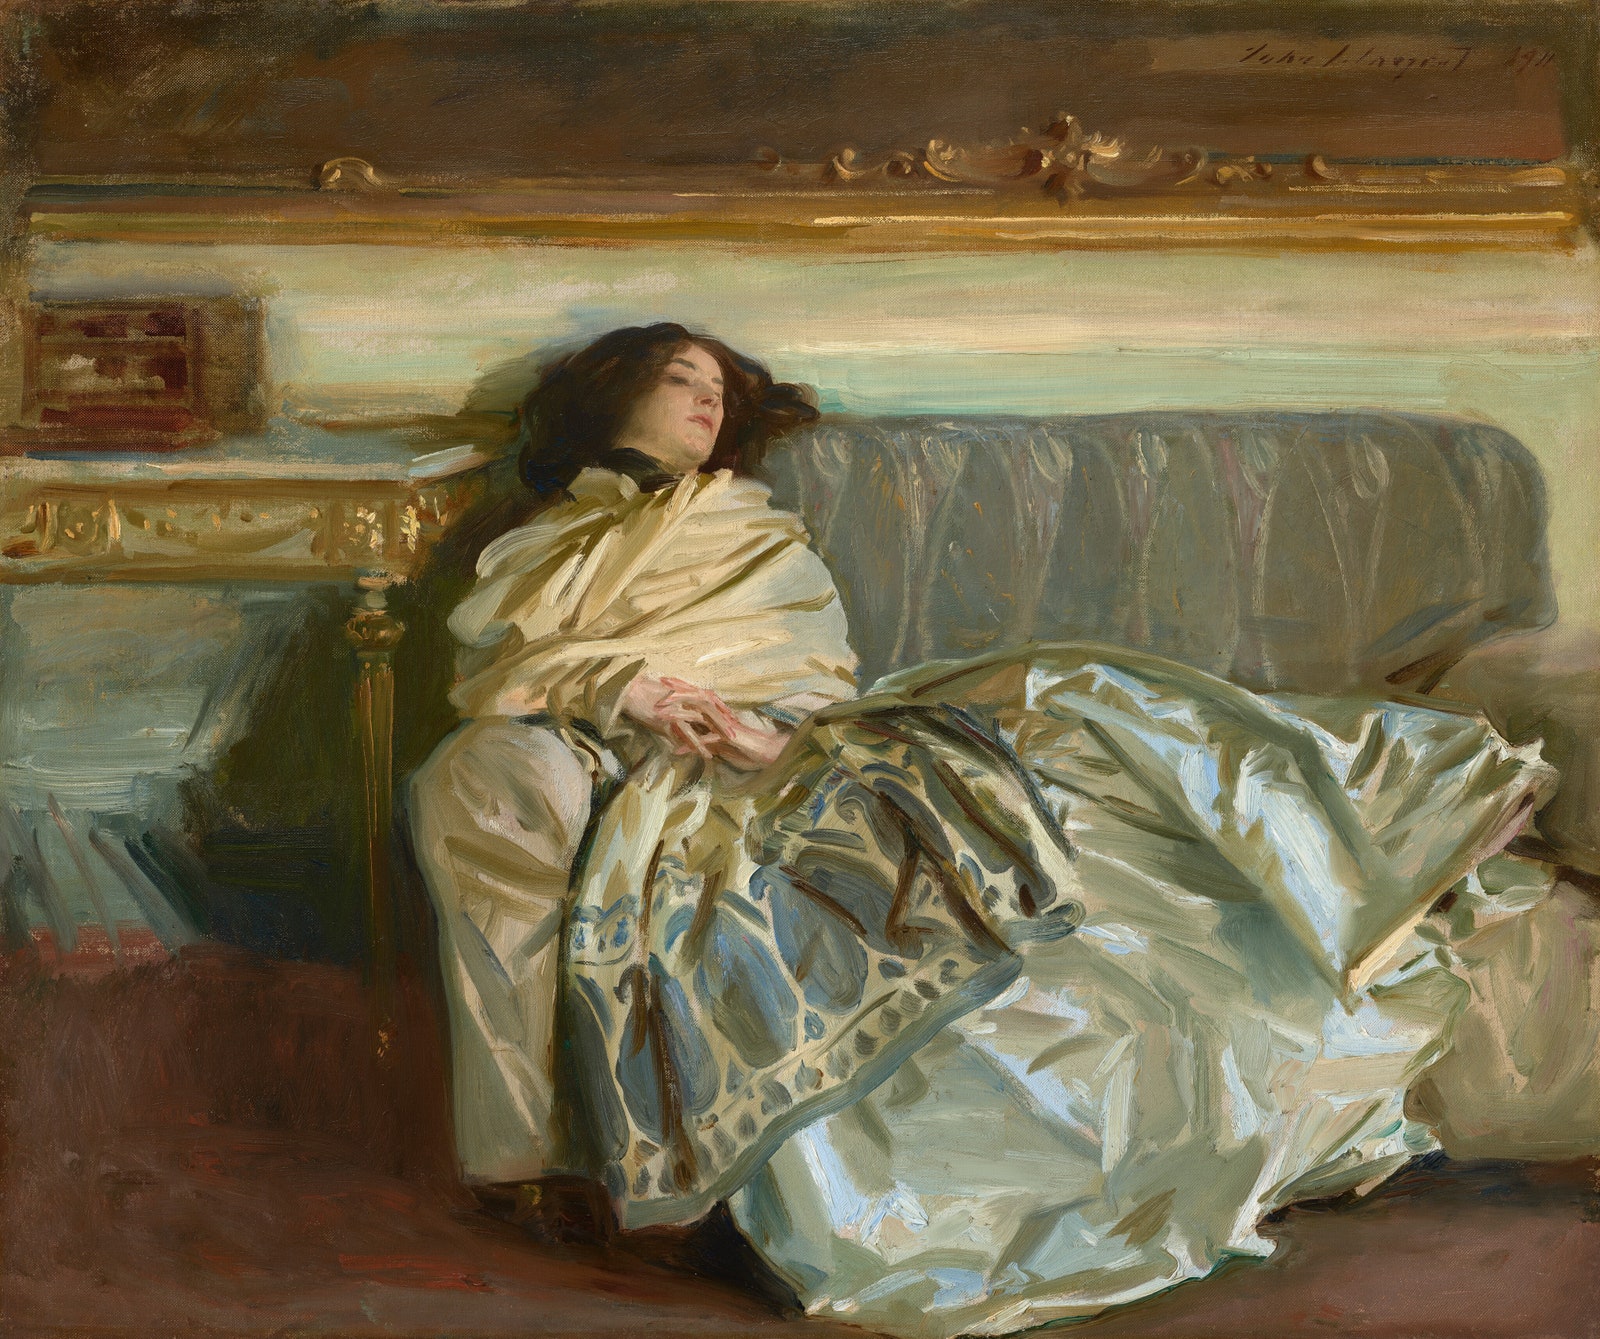 Painting style: John Singer Sargent’s flair for fine fashion